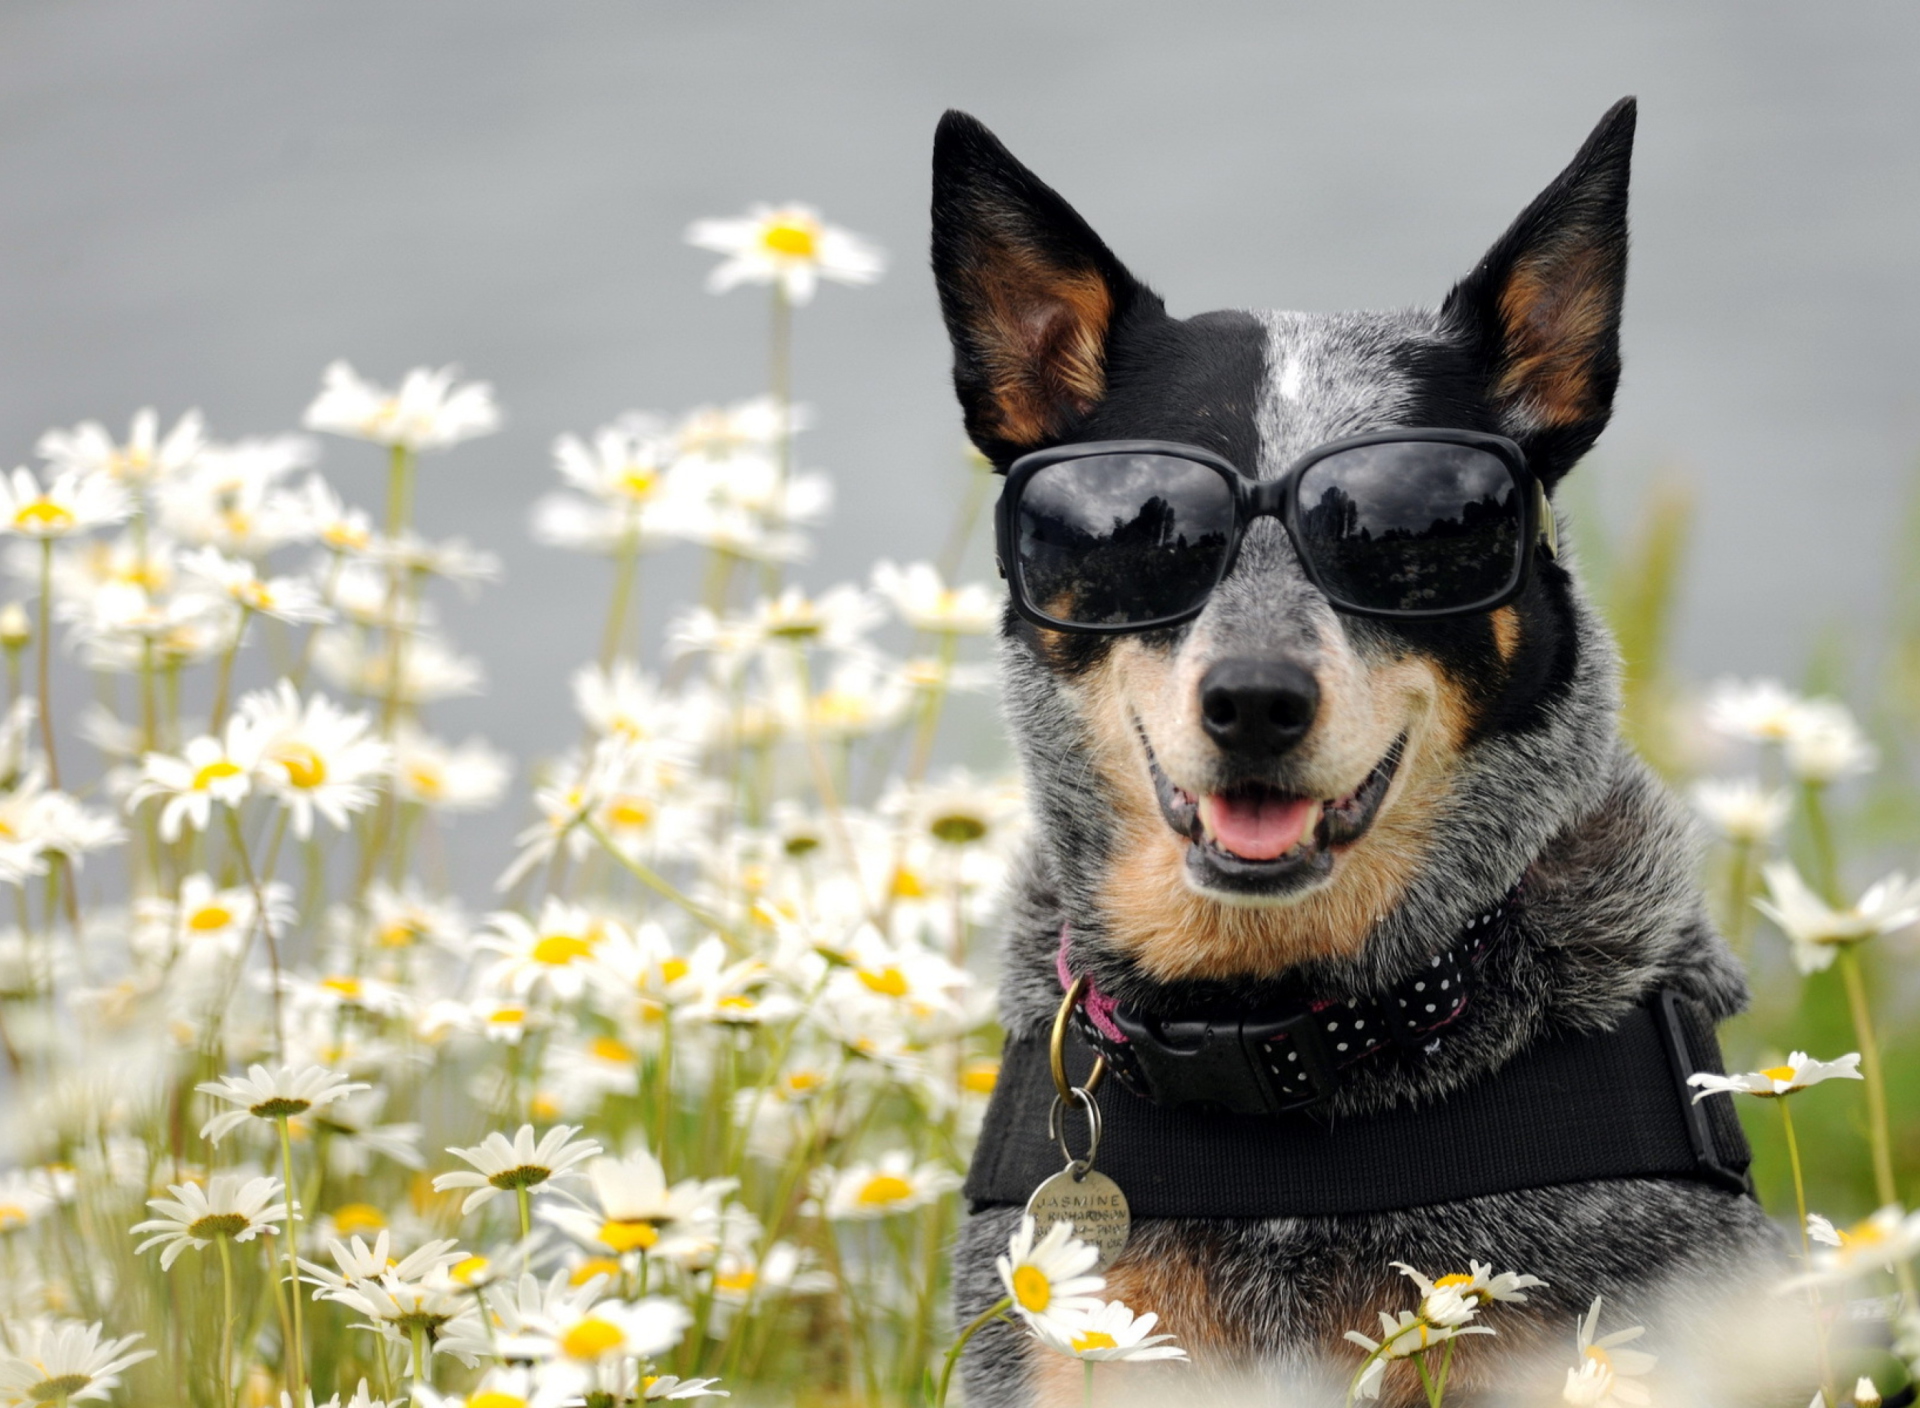 Dog, Sunglasses And Daisies wallpaper 1920x1408